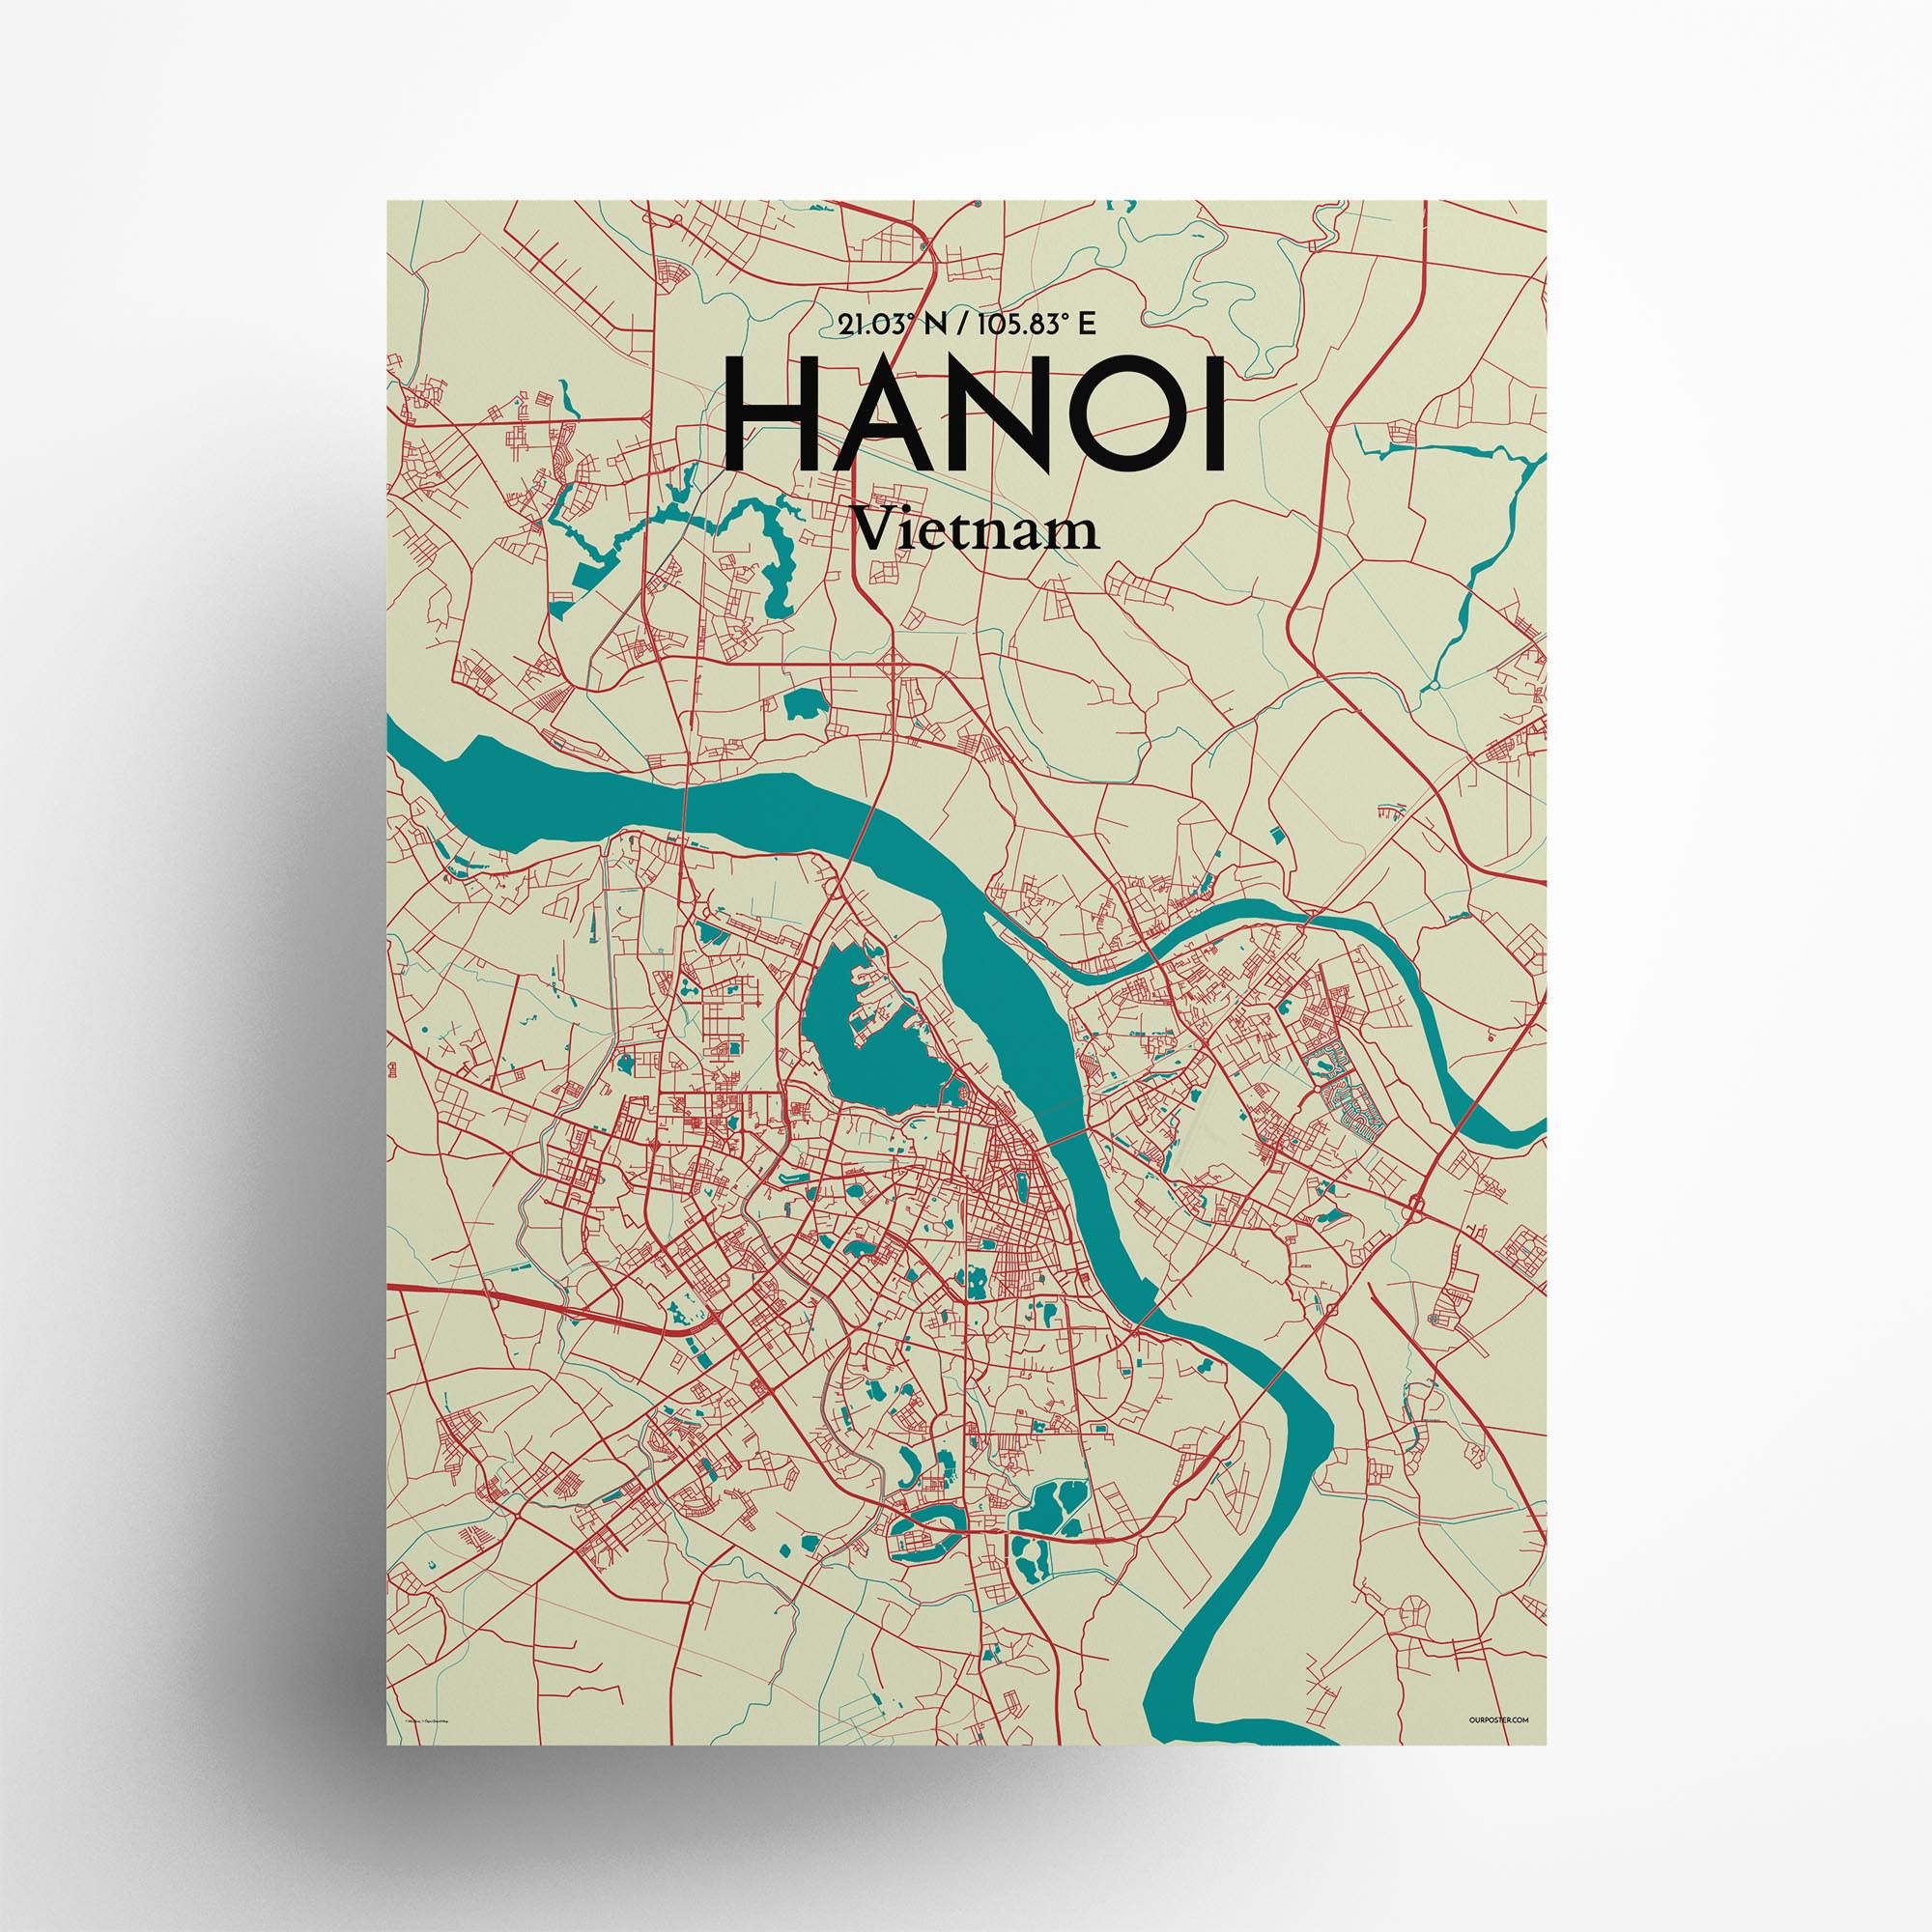 Hanoi city map poster in Tricolor of size 18" x 24"